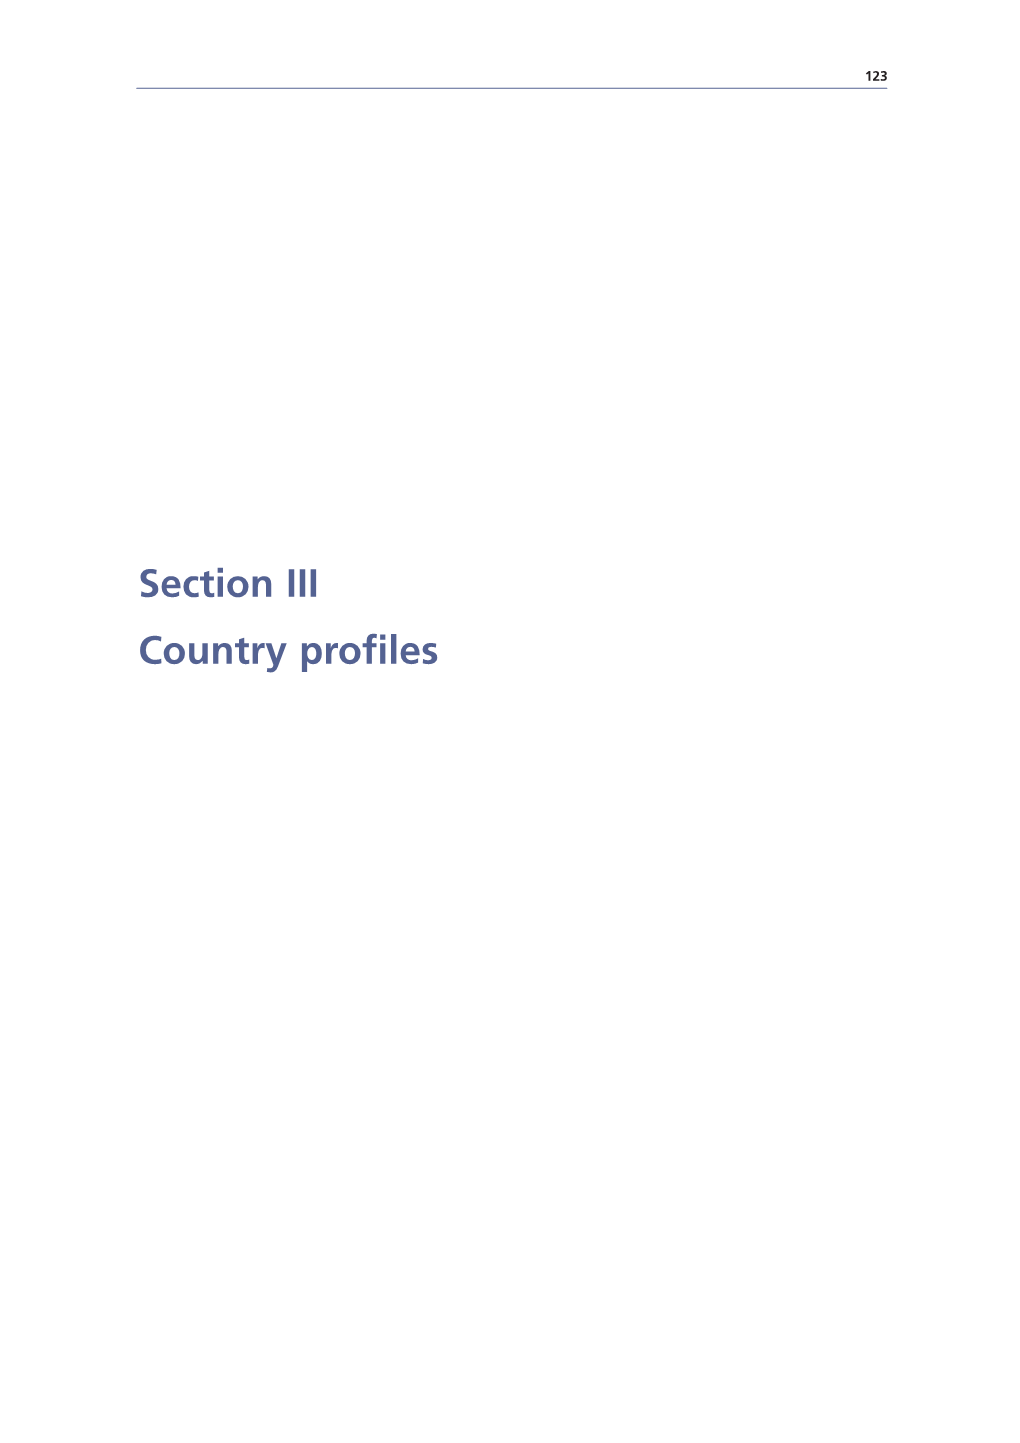 Section III Country Profiles